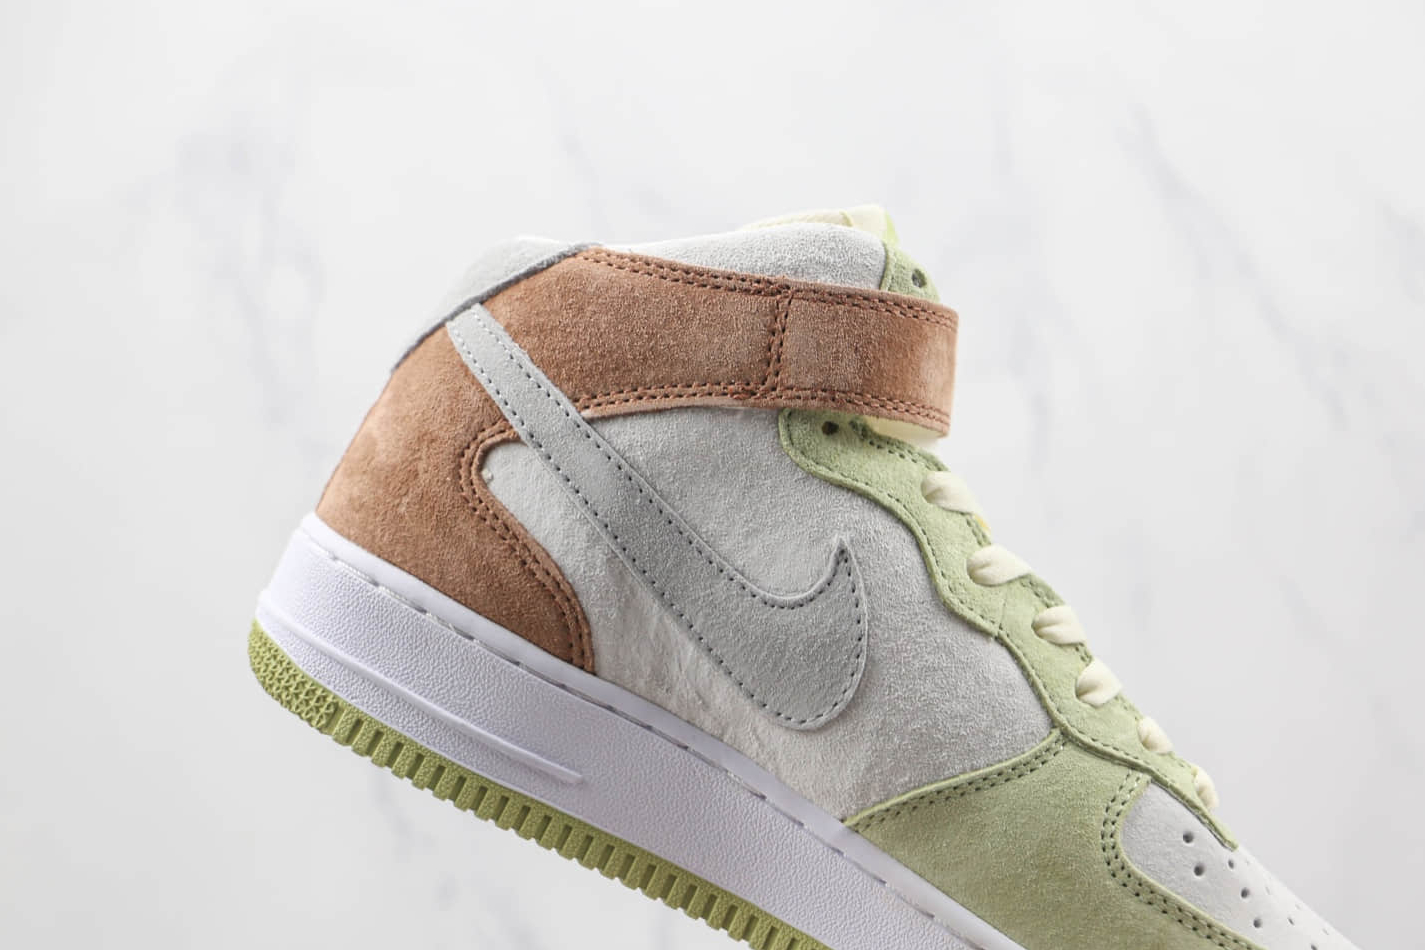 Nike Air Force 1 Mid 07 Light Green Grey White AL6896-558 - Stylish Footwear for All-Day Comfort